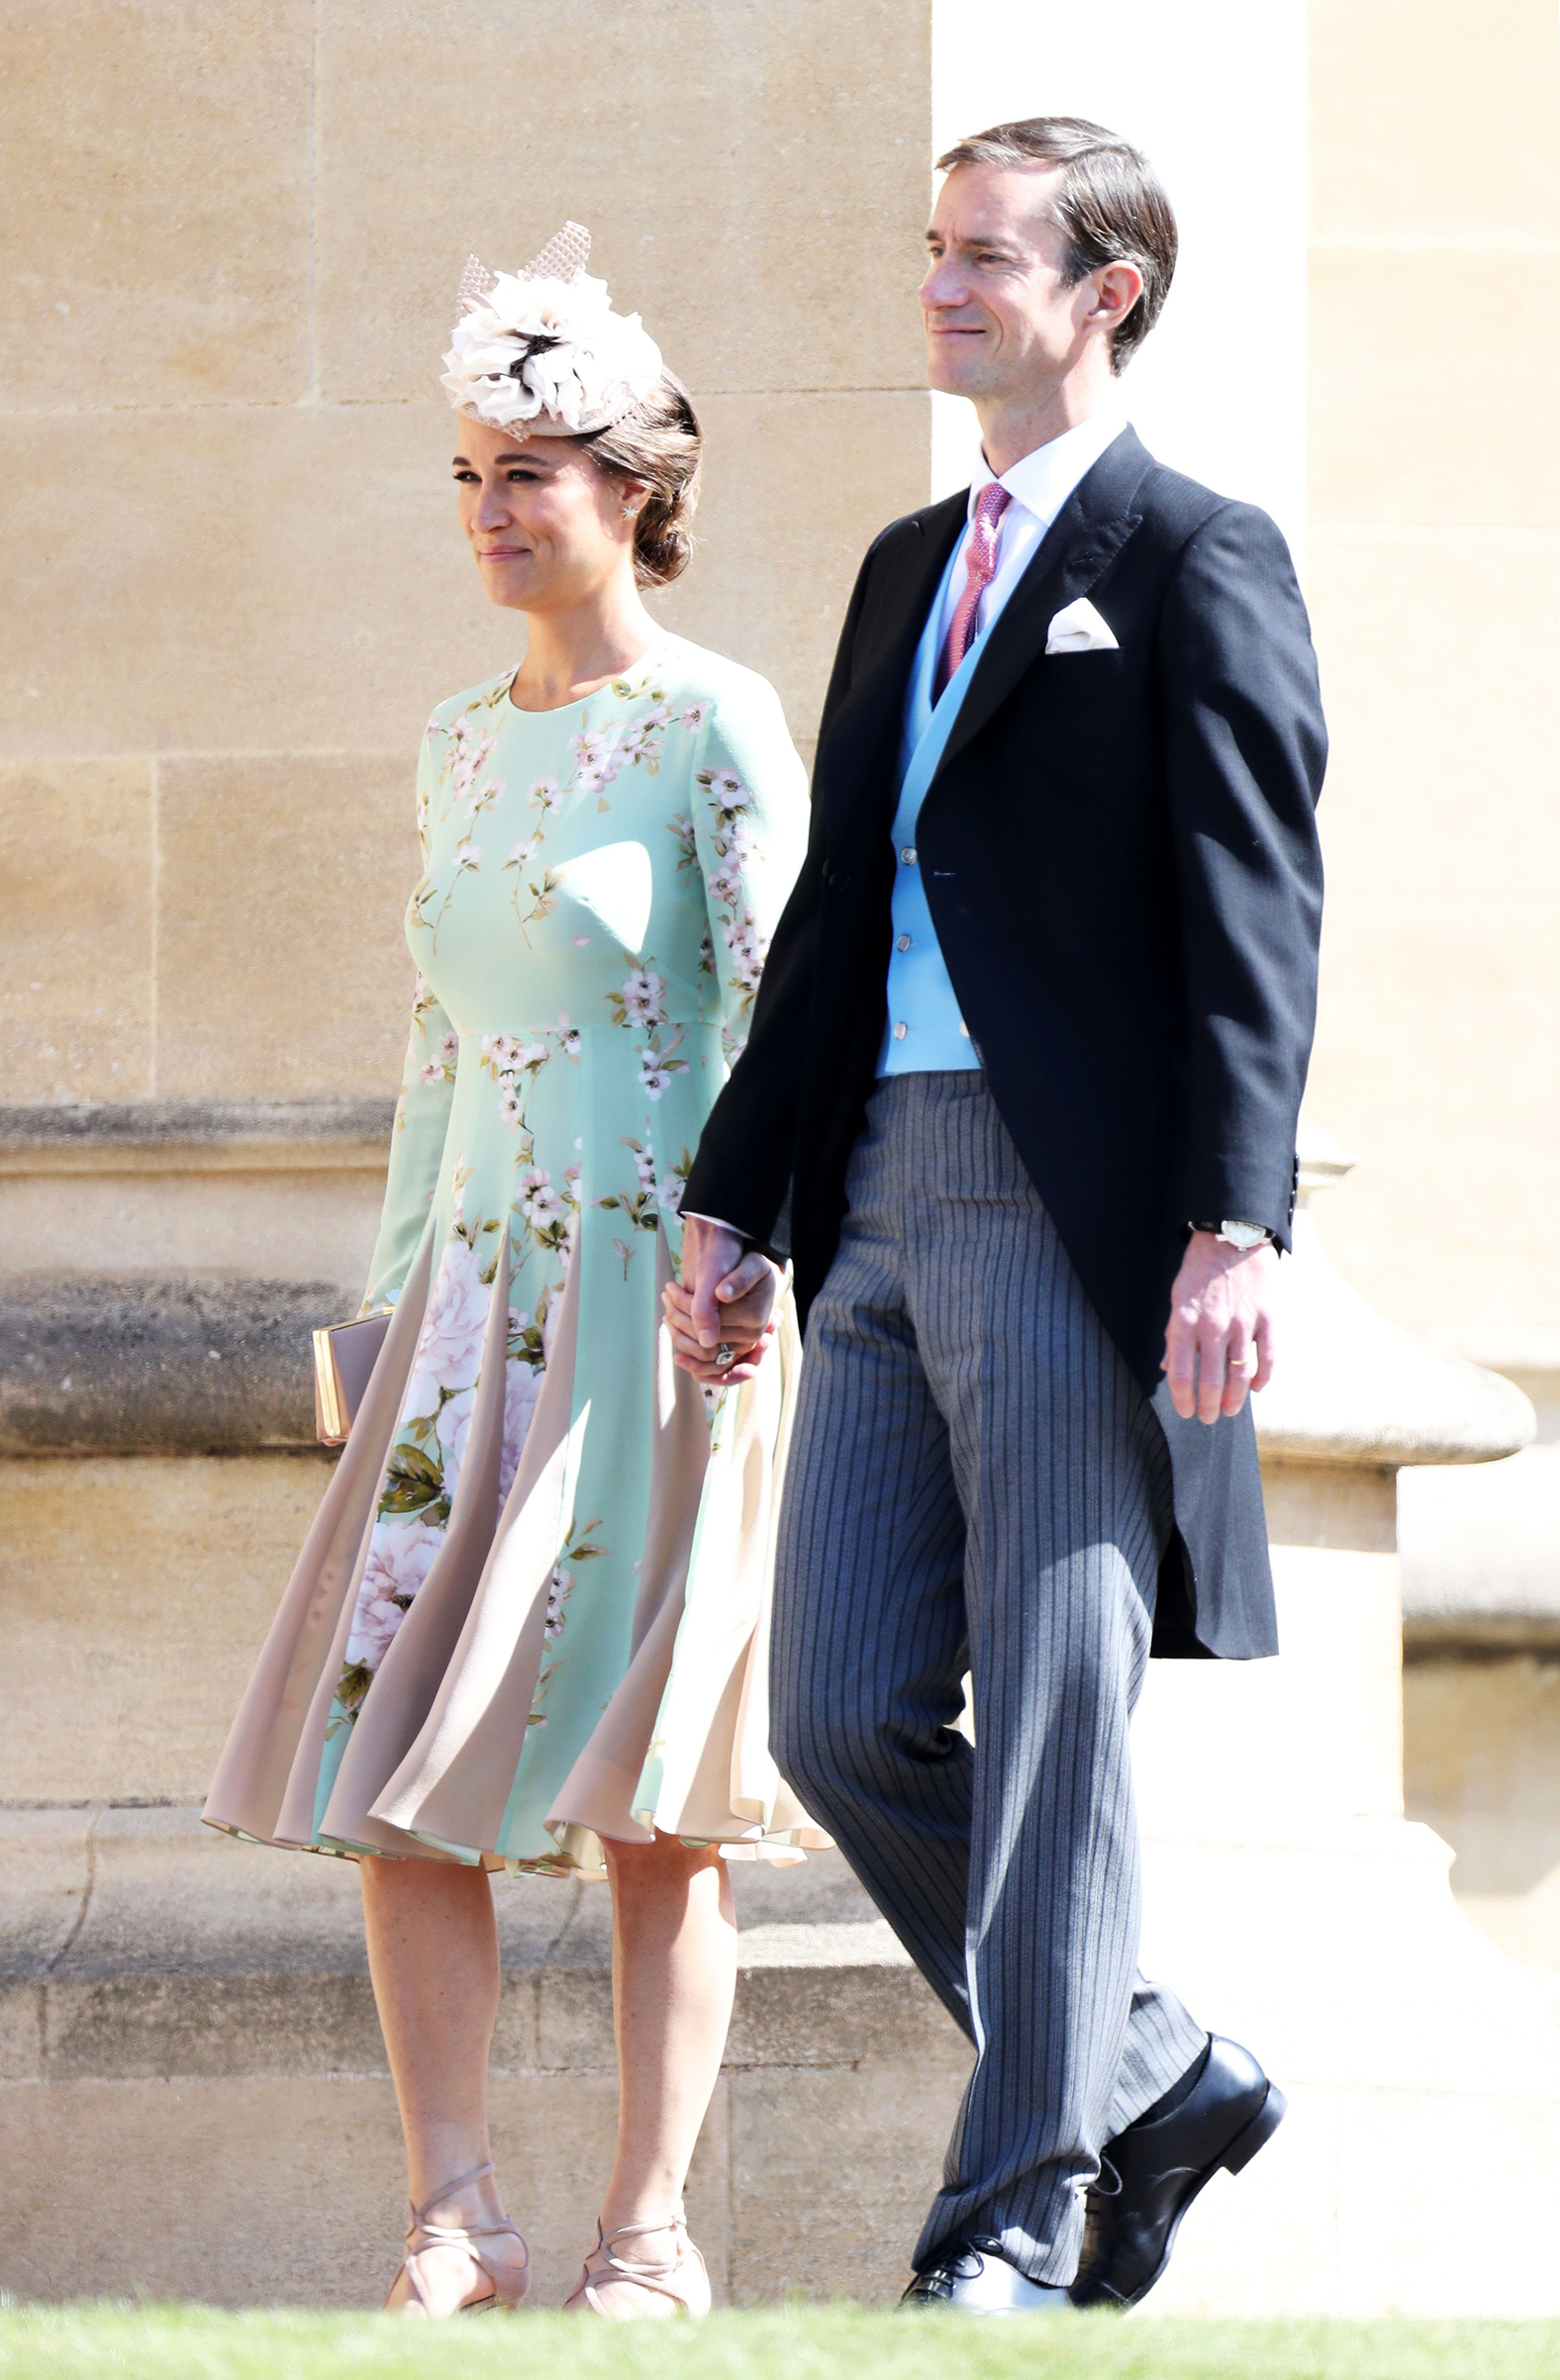 Pippa Middleton and James Matthews arrive at the wedding of Prince Harry and Meghan Markle at St George's Chapel, Windsor Castle on May 19, 2018.